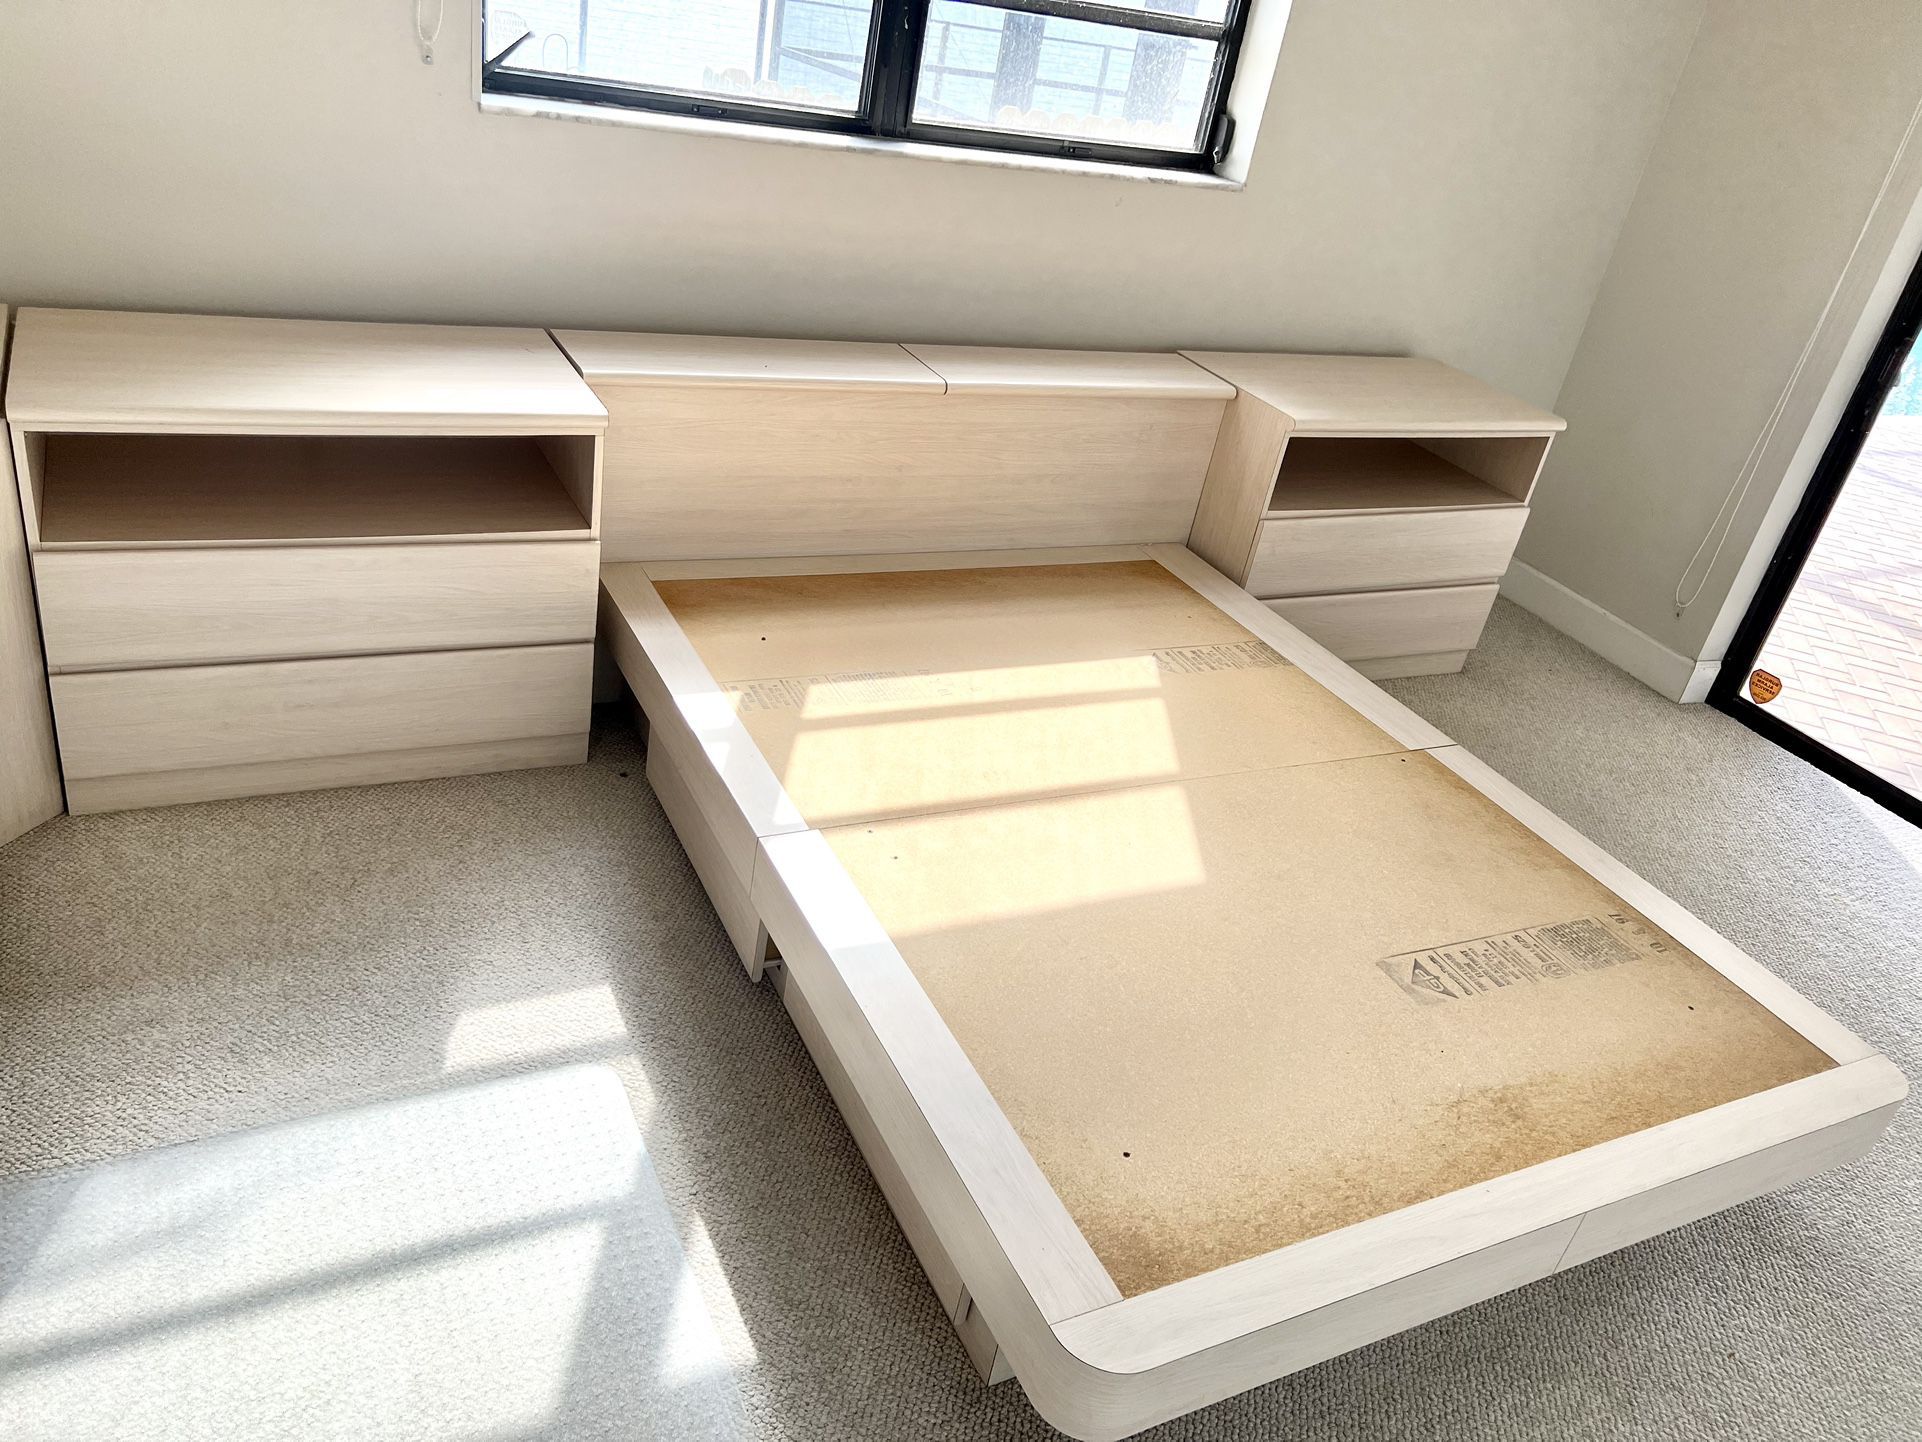  Platform bed with drawers , nightstands and  Wall Unit - Price For All 